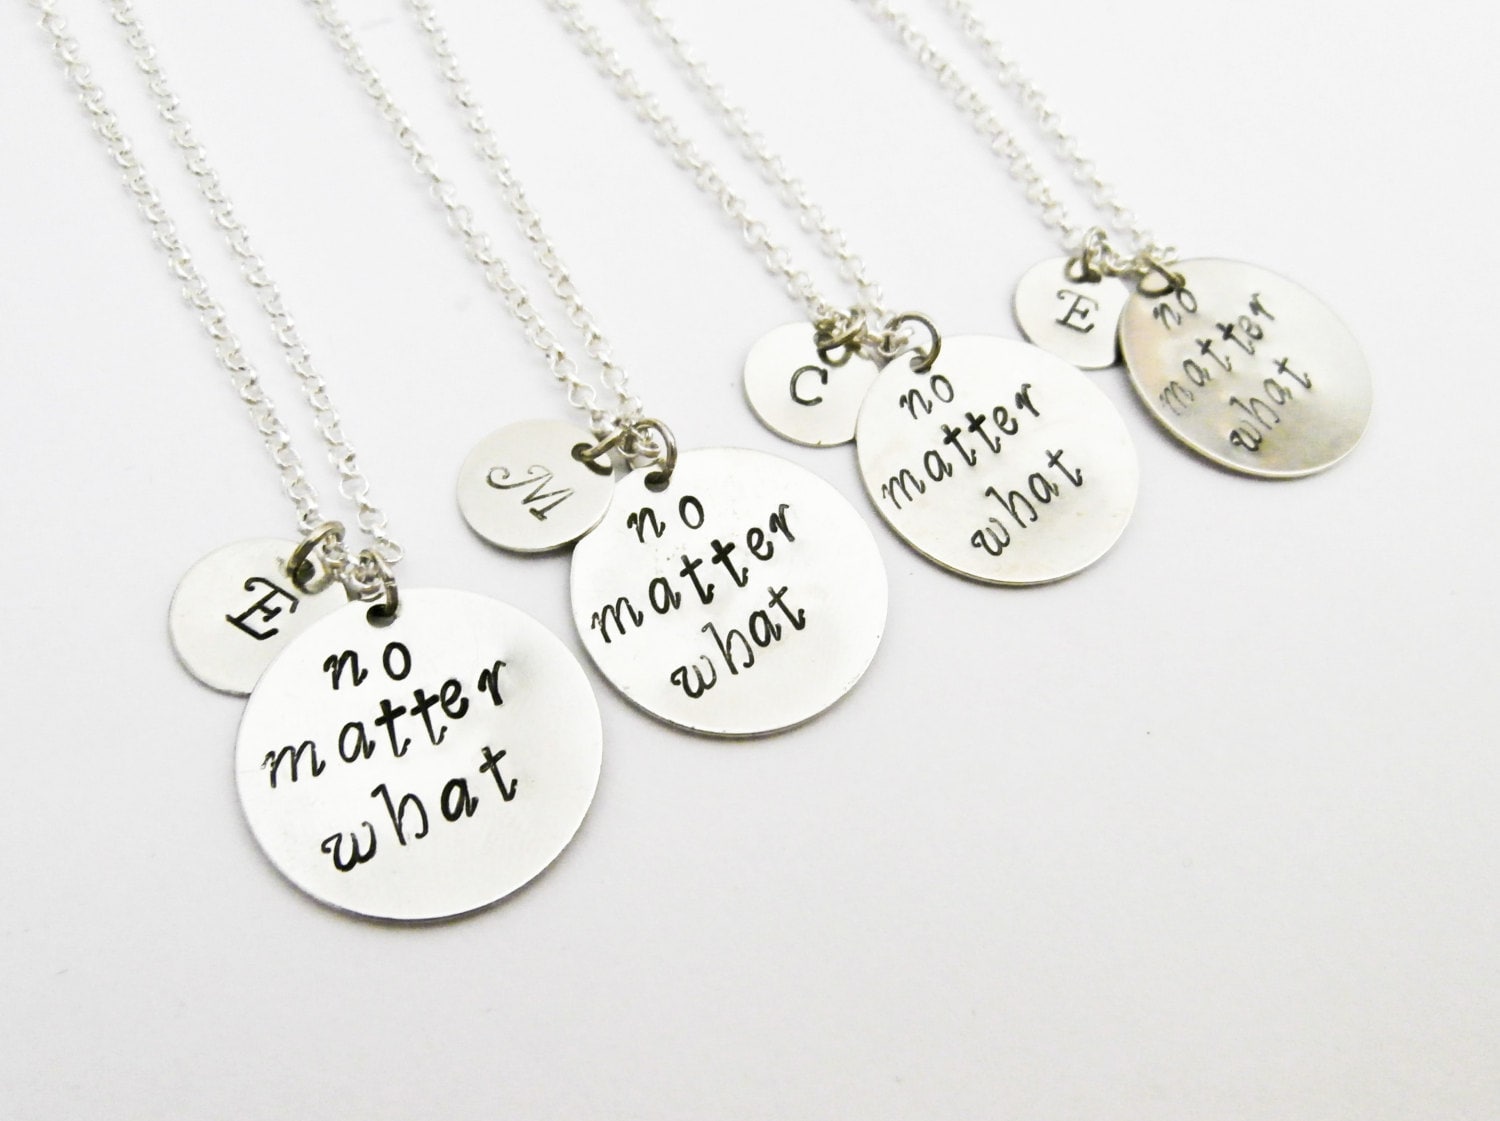 4 best friend necklace no matter WHAT initial necklace